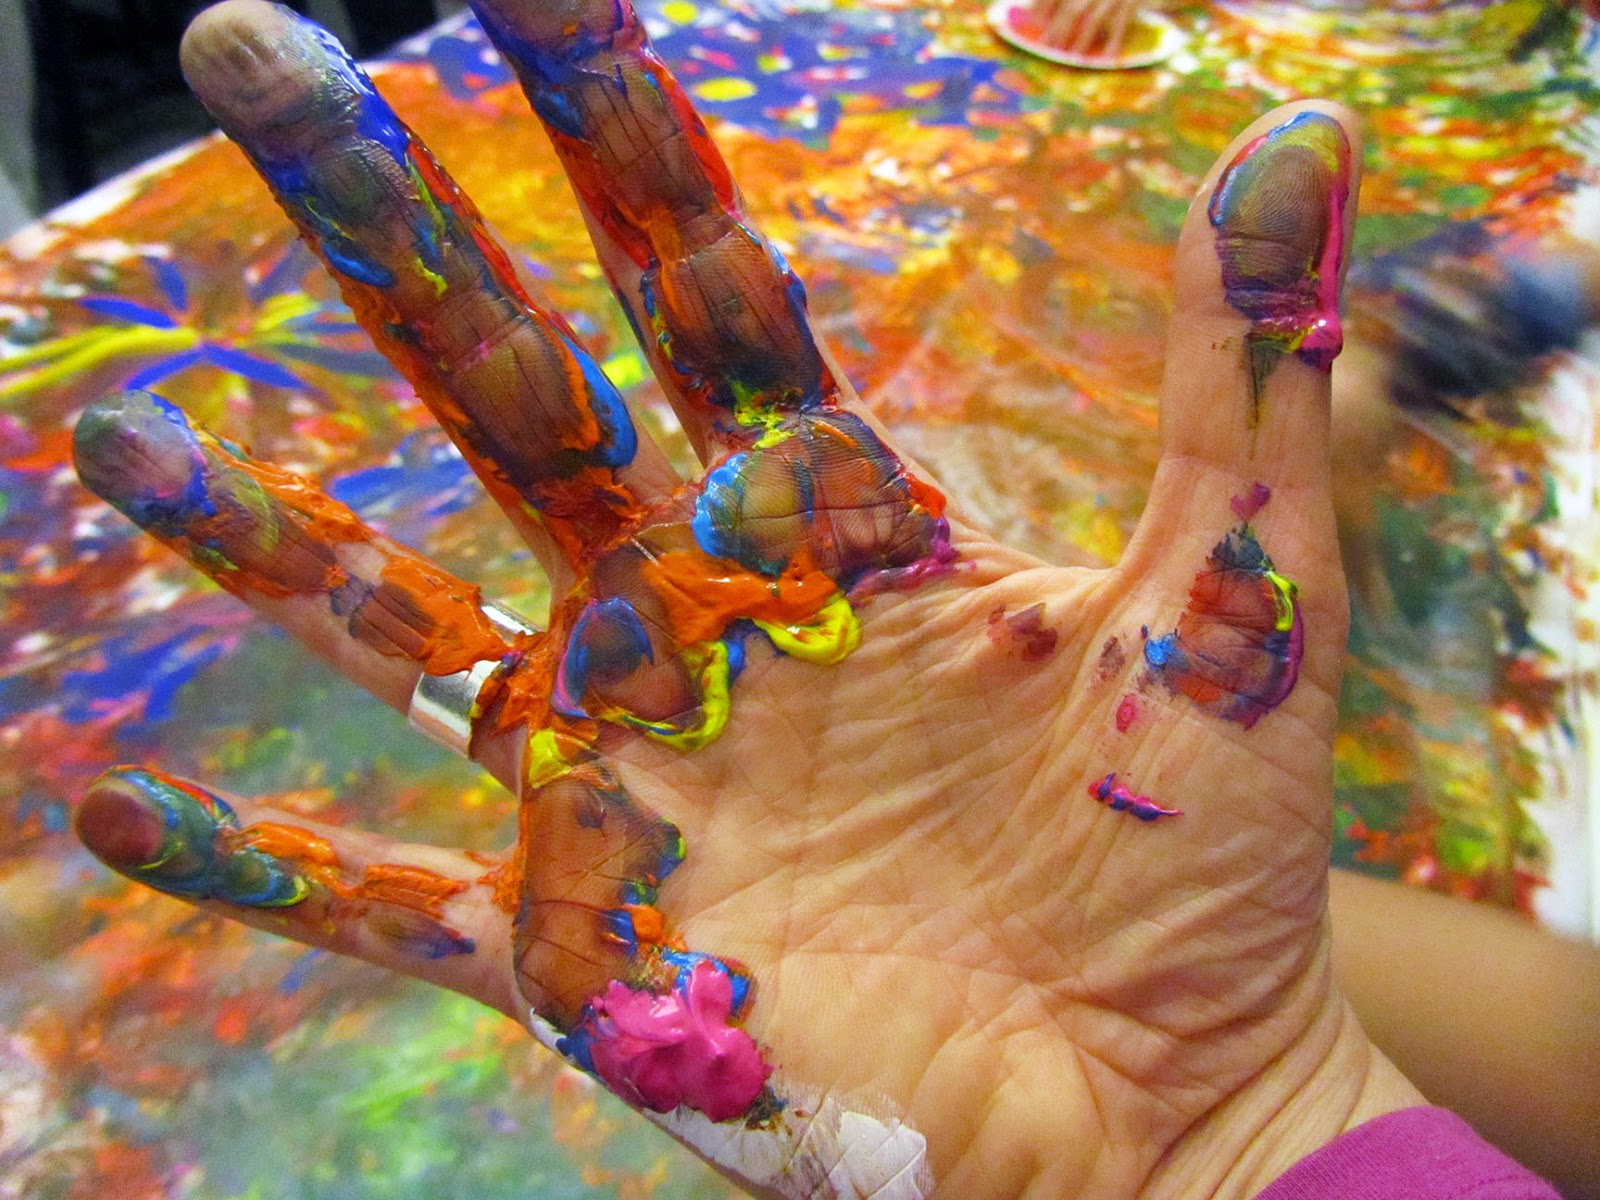 yoku: my hand covered in paint